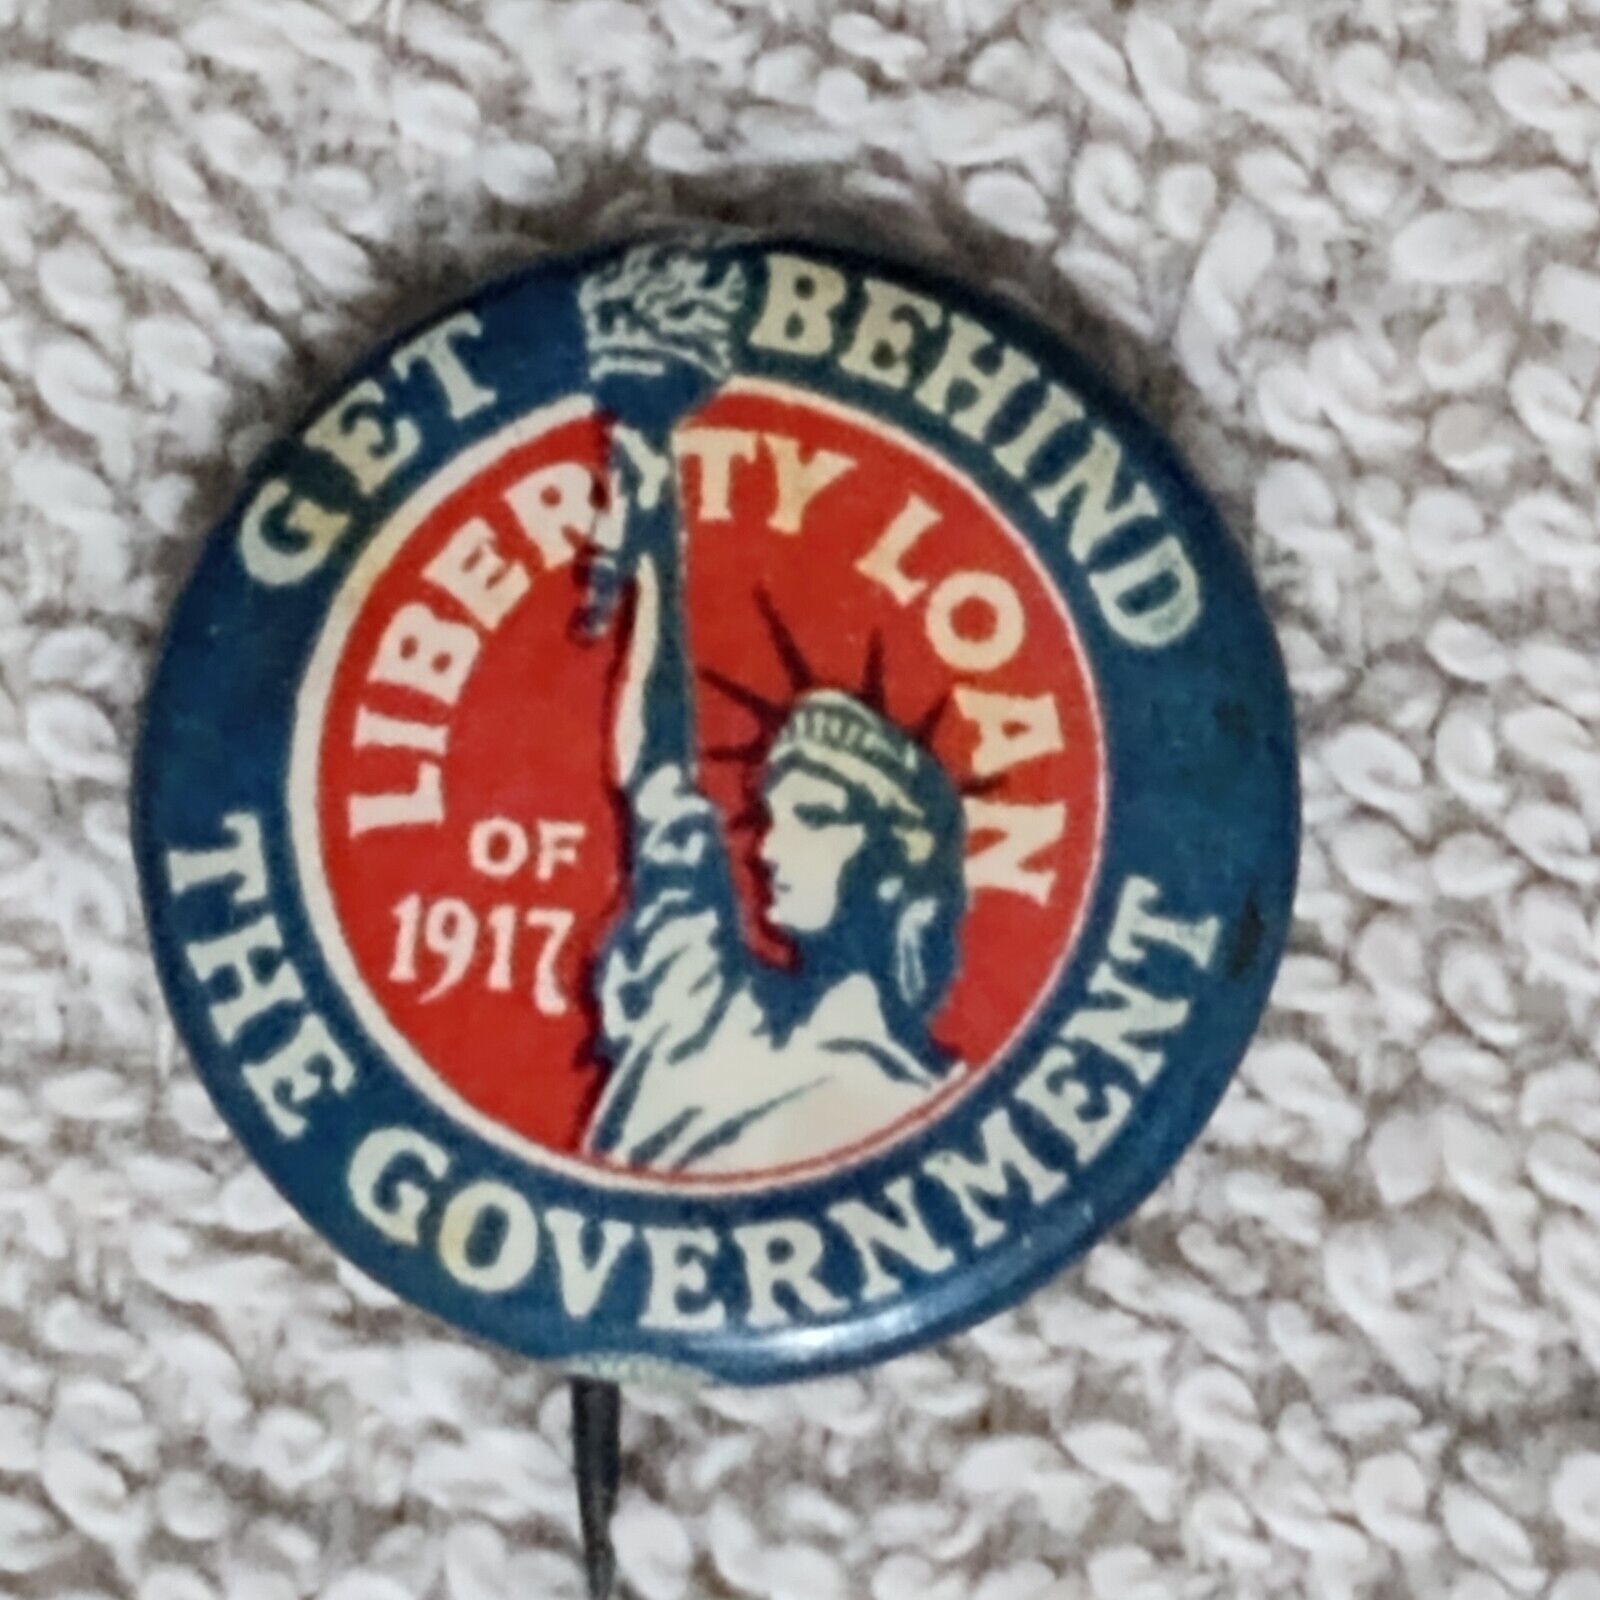 Get Behind The Government Liberty Loan of 1917 Antique Pin-Back/Button